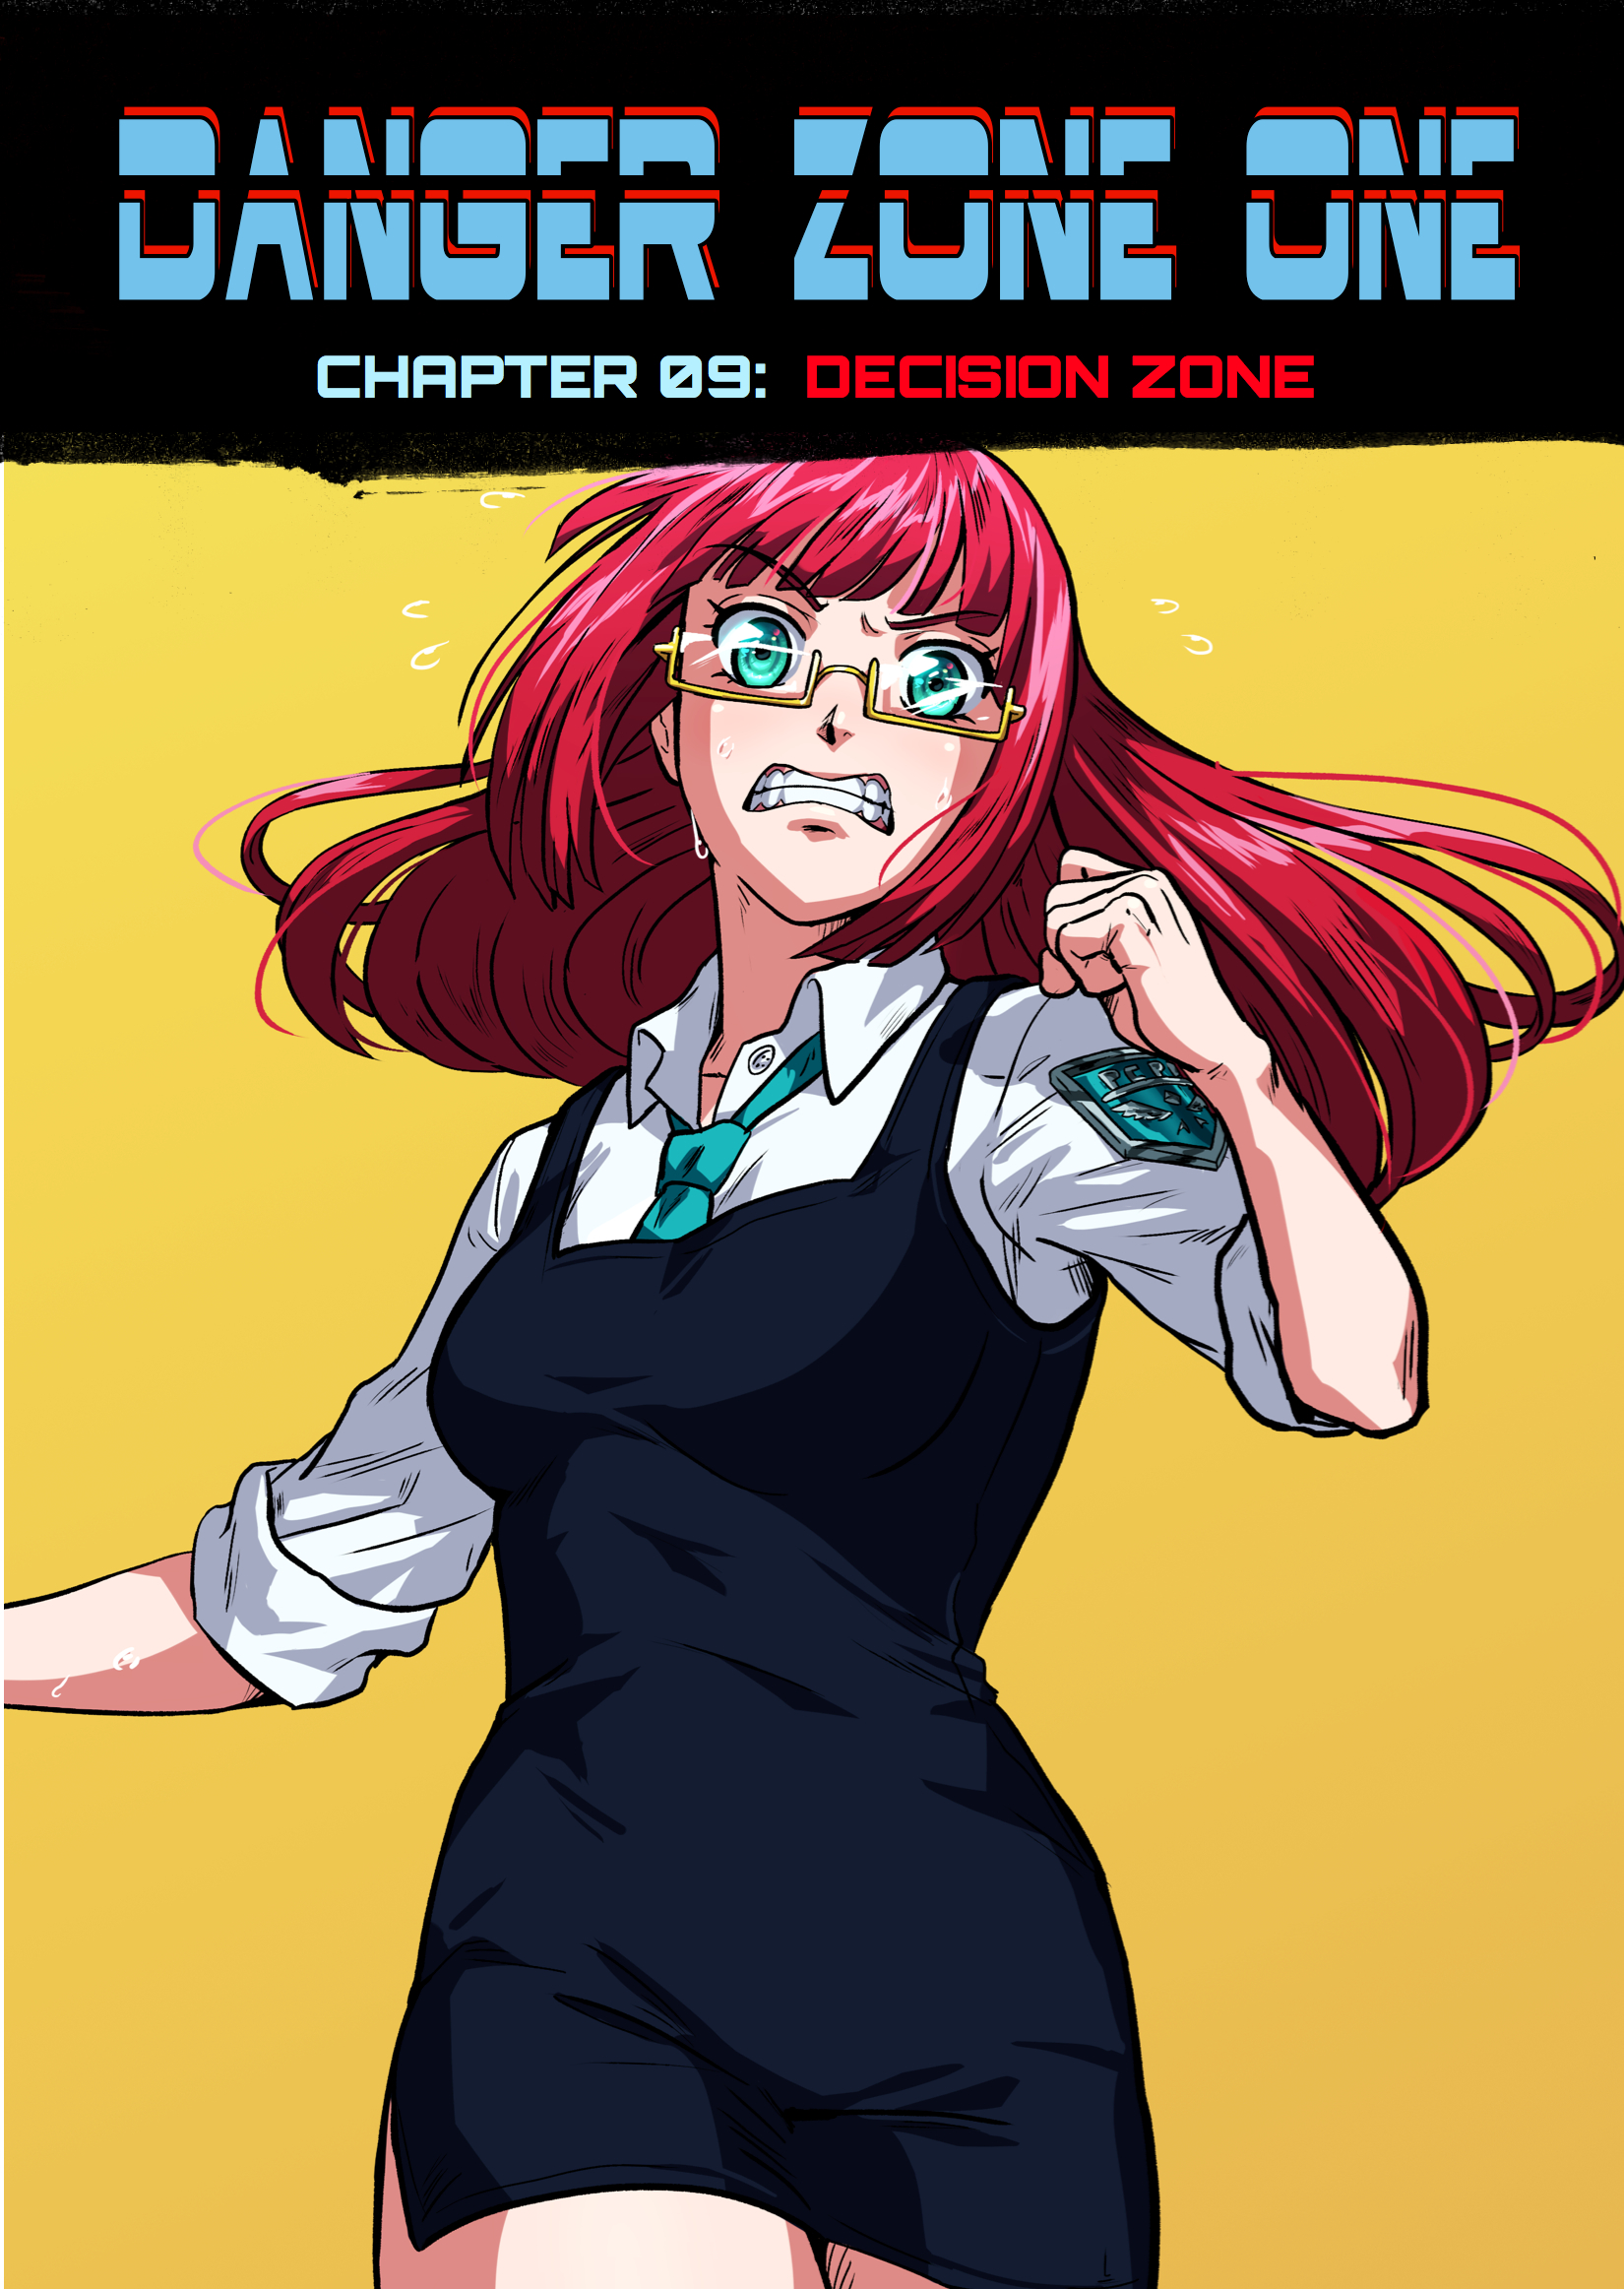 Danger Zone One Chapter 9